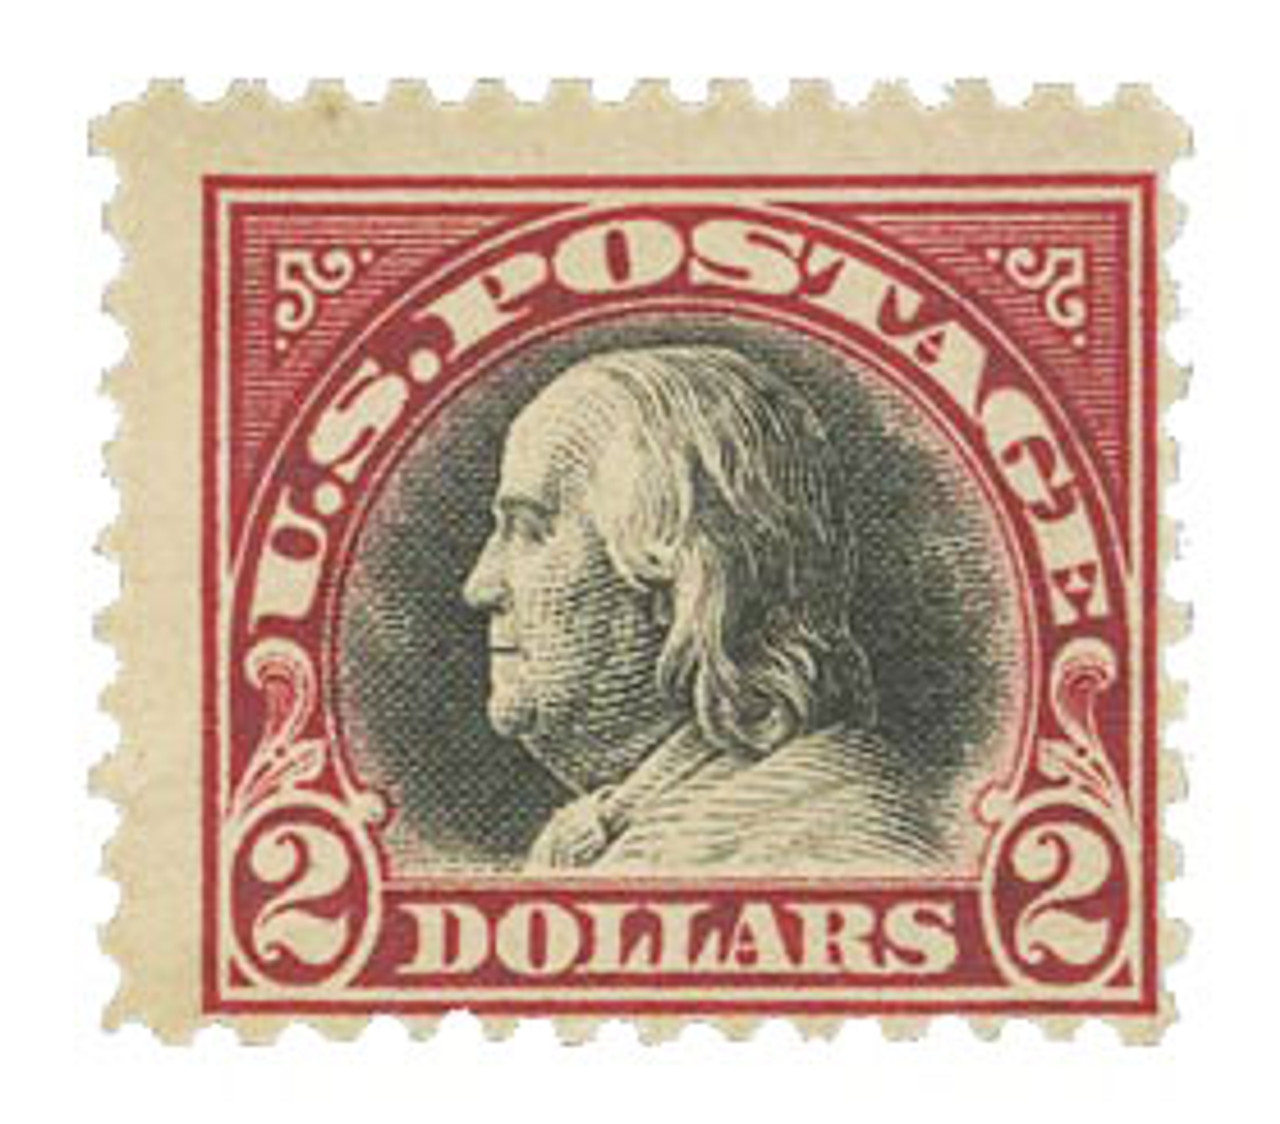 This 105-Year-Old U.S. Stamp Just Sold for a Record $2 Million